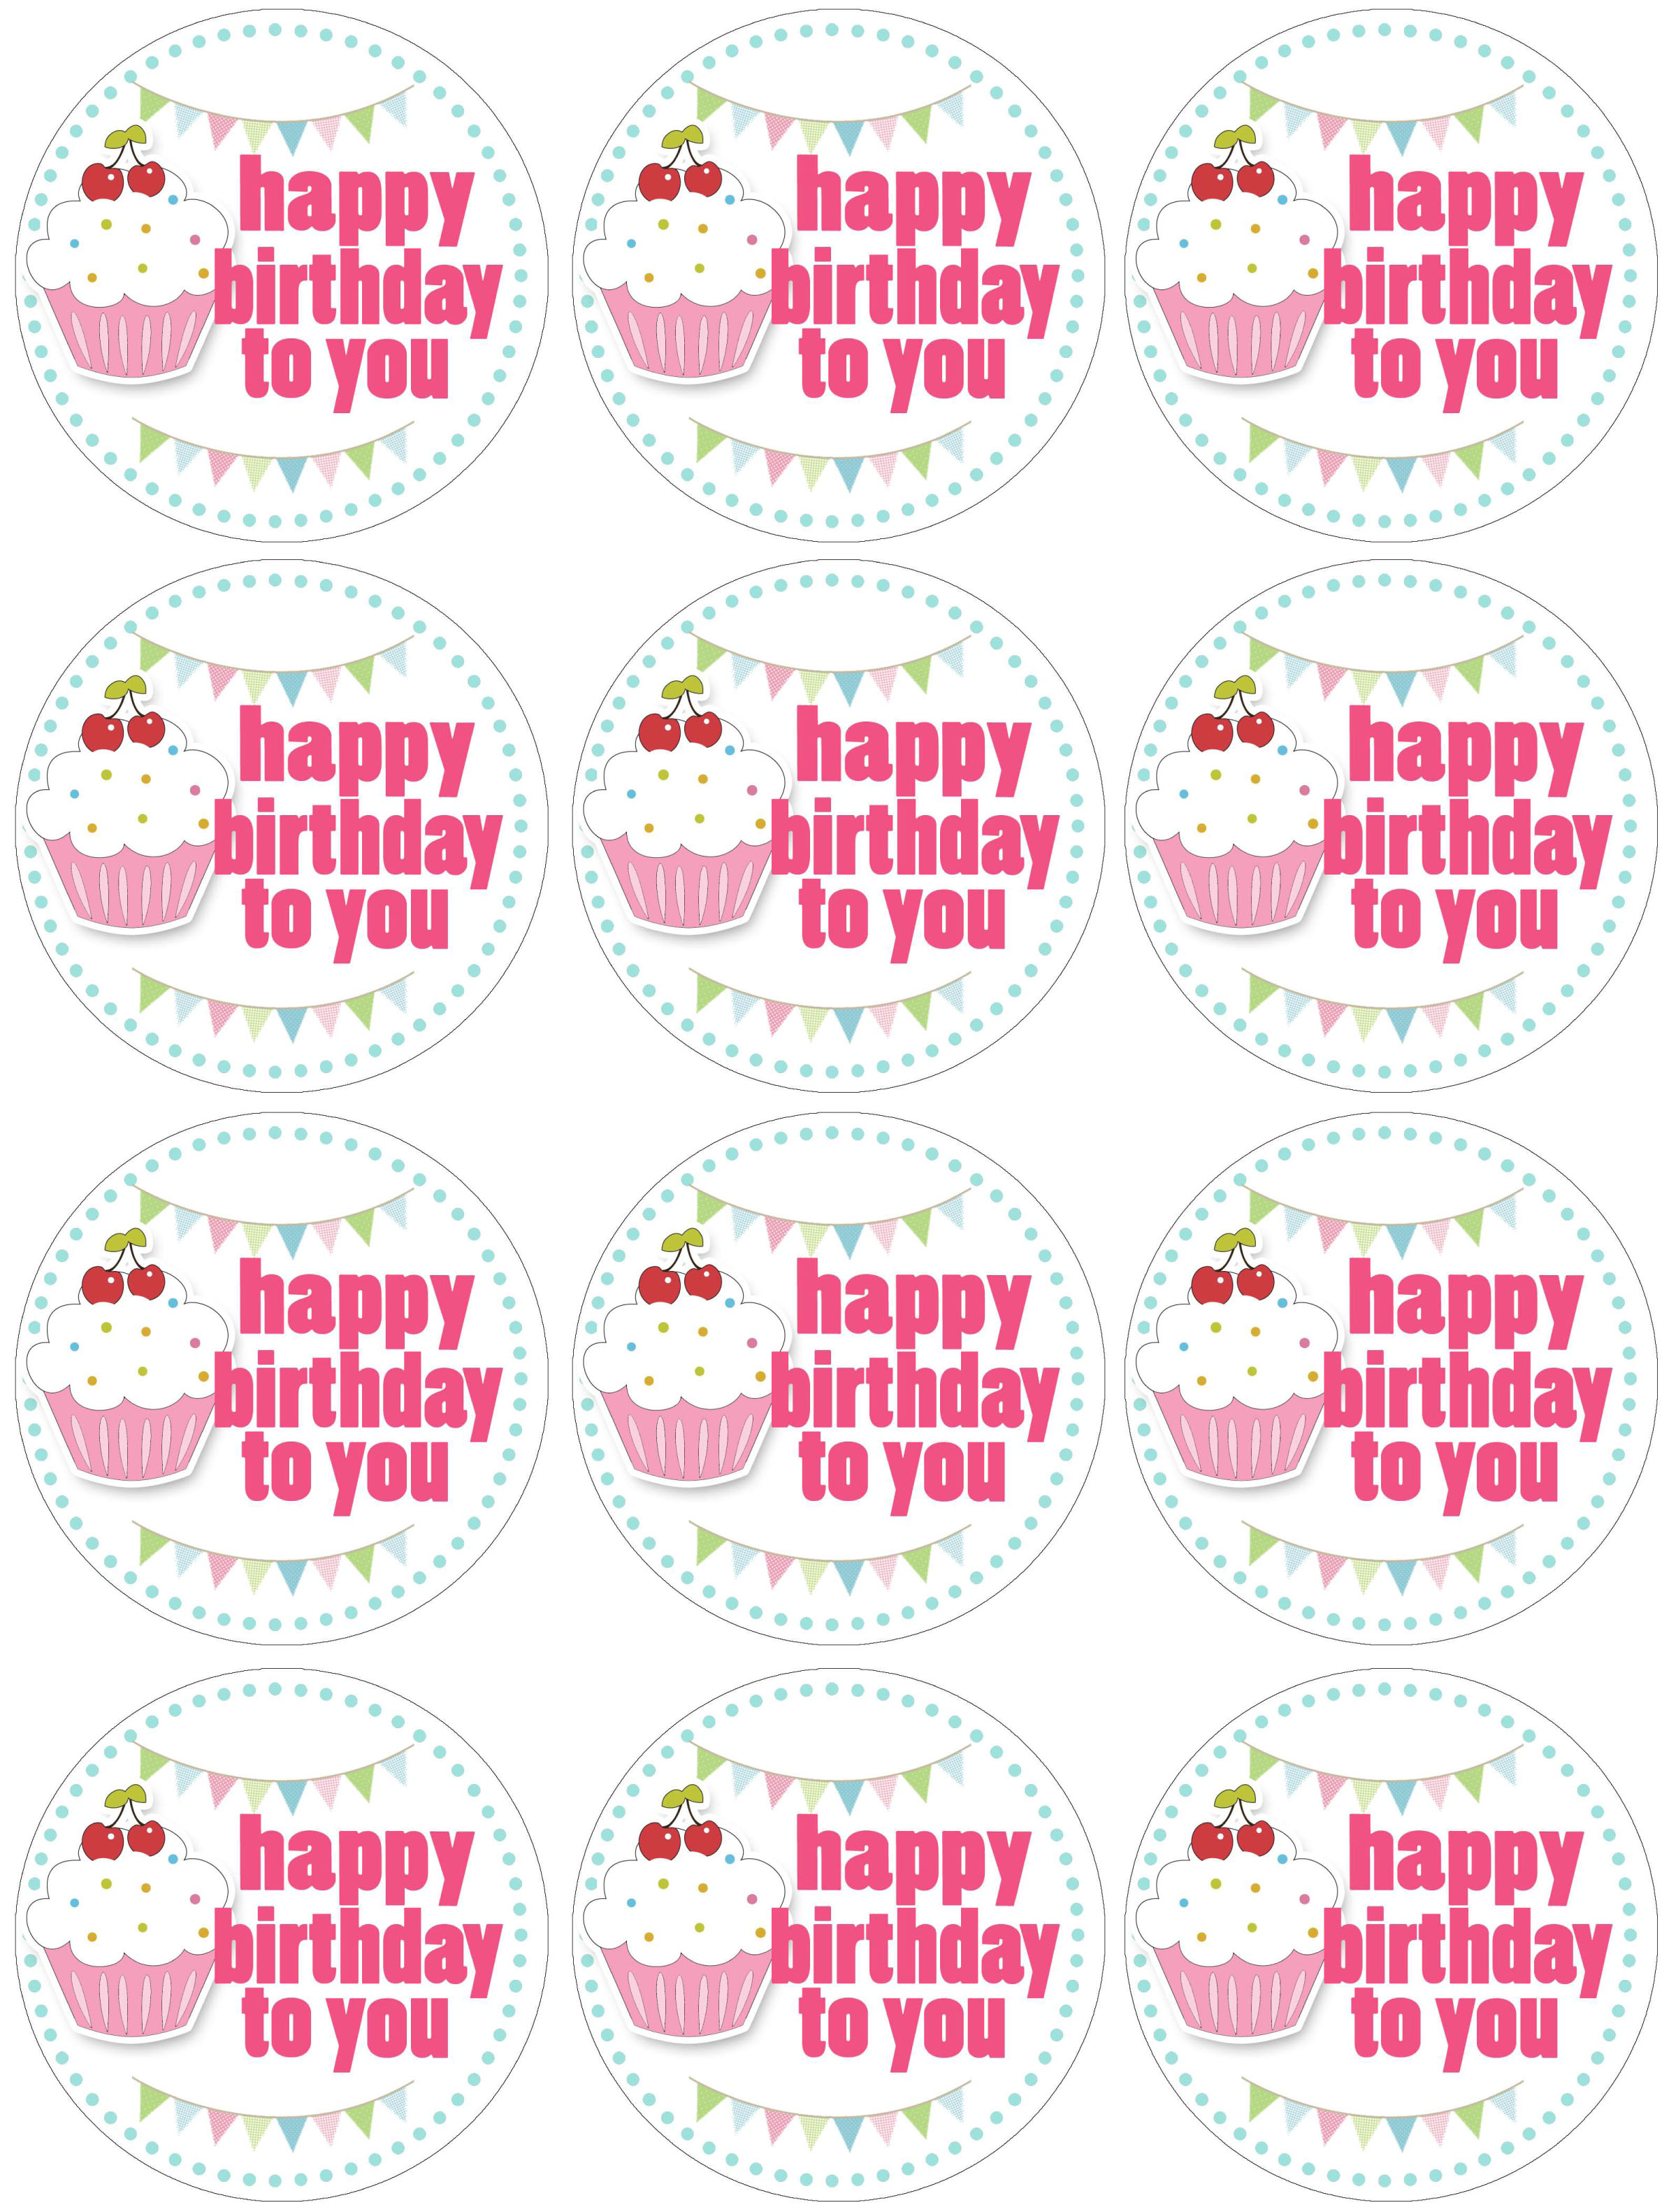 6 Best Images of Inside Out Free Printable Birthday Cupcake Topper